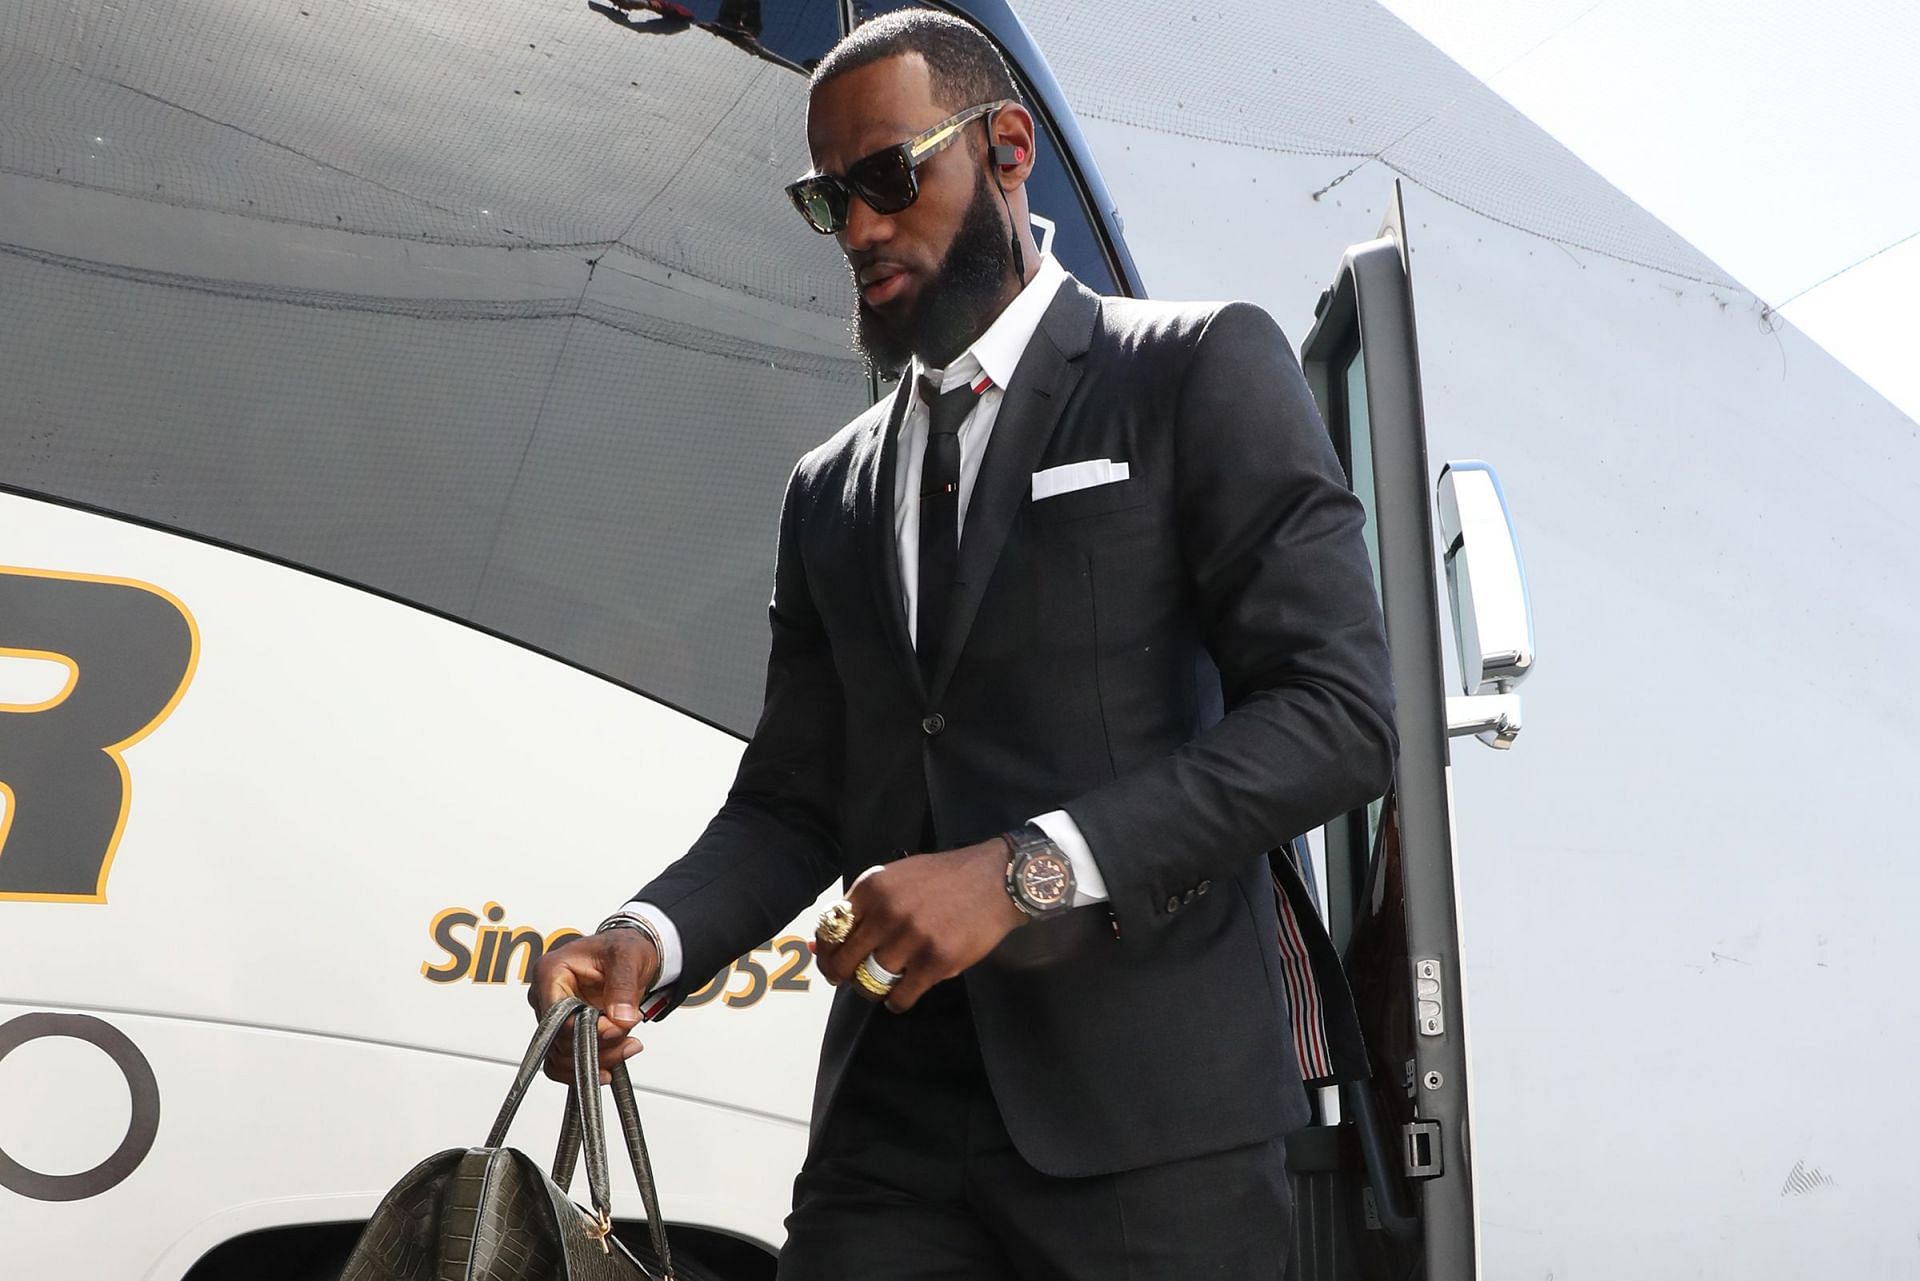 LeBron James in Suit and Tie matched with Shorts